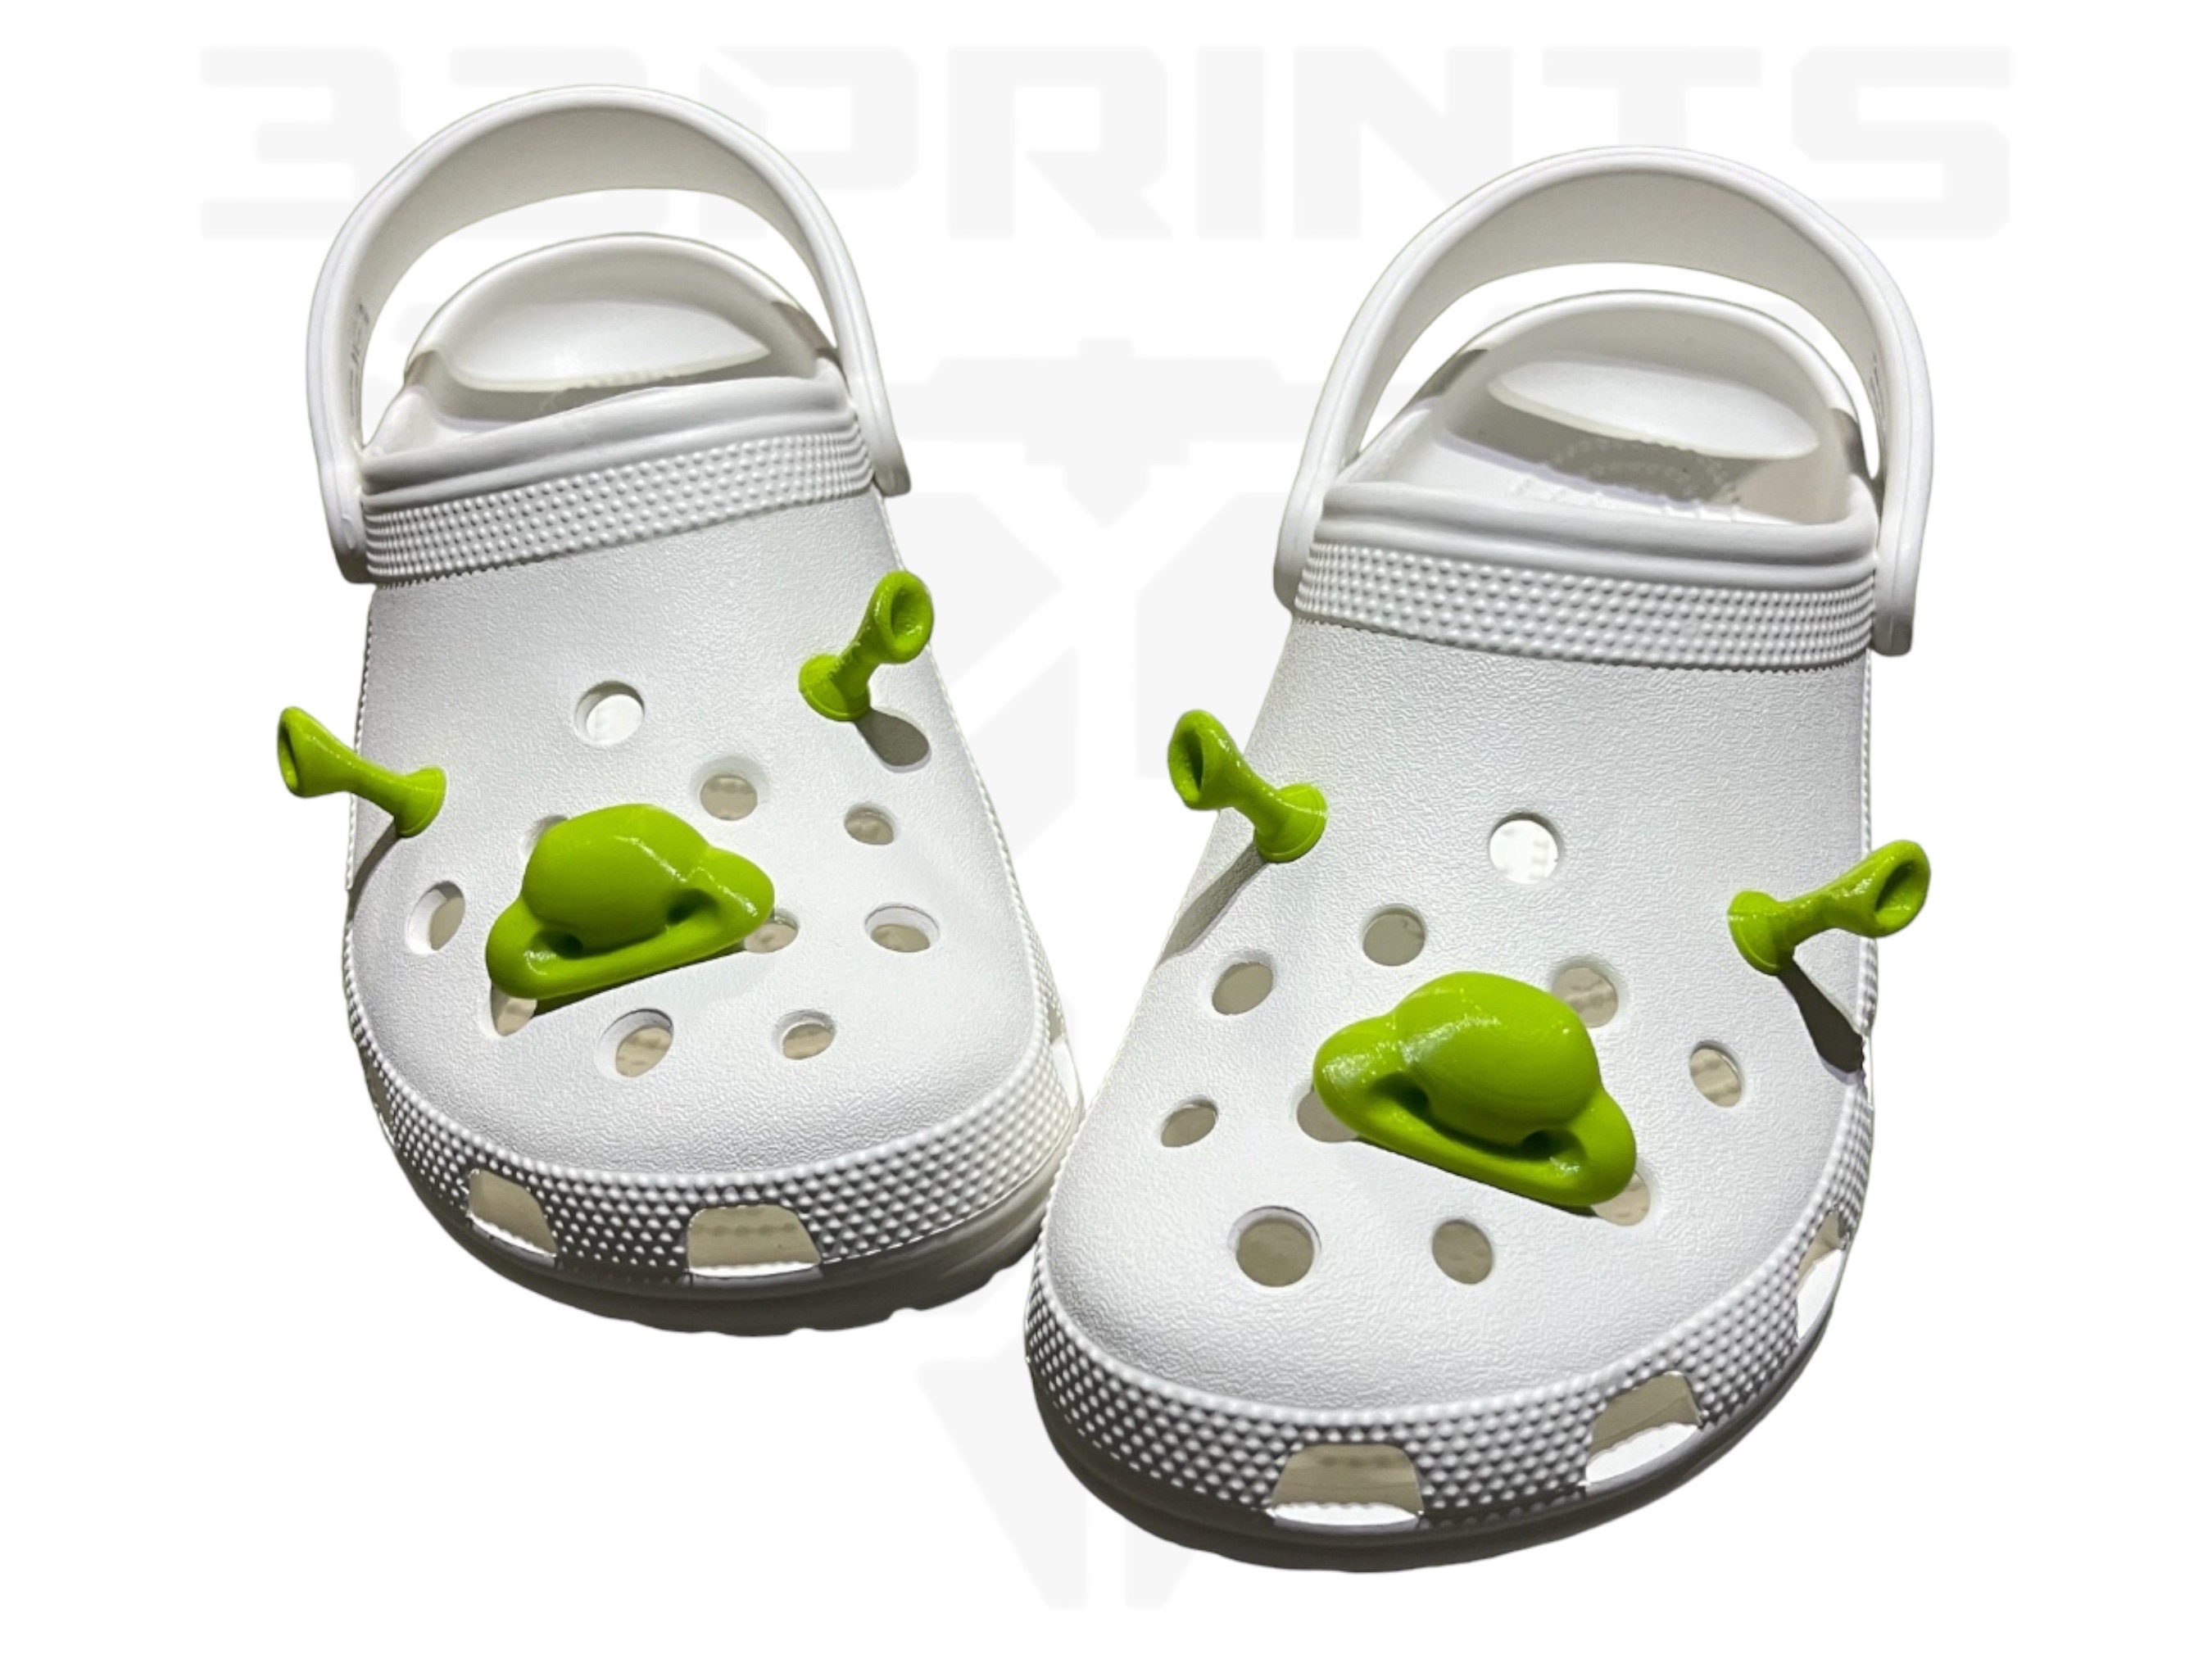 Ogre Ears Shoe Charms - Compatible with clog style shoes - 3D Printed Croc  Shrek Ear Charms - Made in USA Customized Croc Shrek Ear - Croc Charm Set -  Personalized Shrek